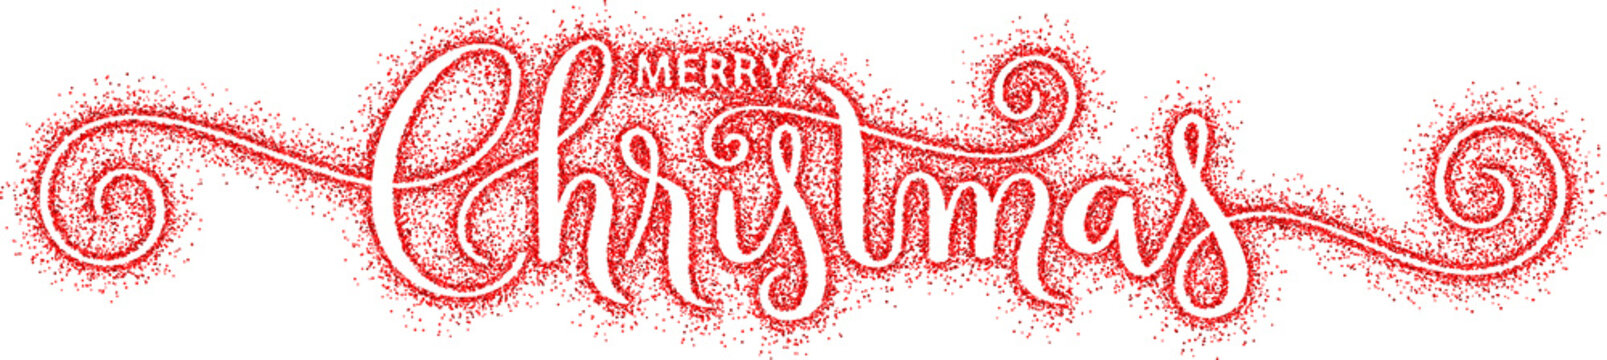 MERRY CHRISTMAS brush calligraphy banner with red confetti on transparent background